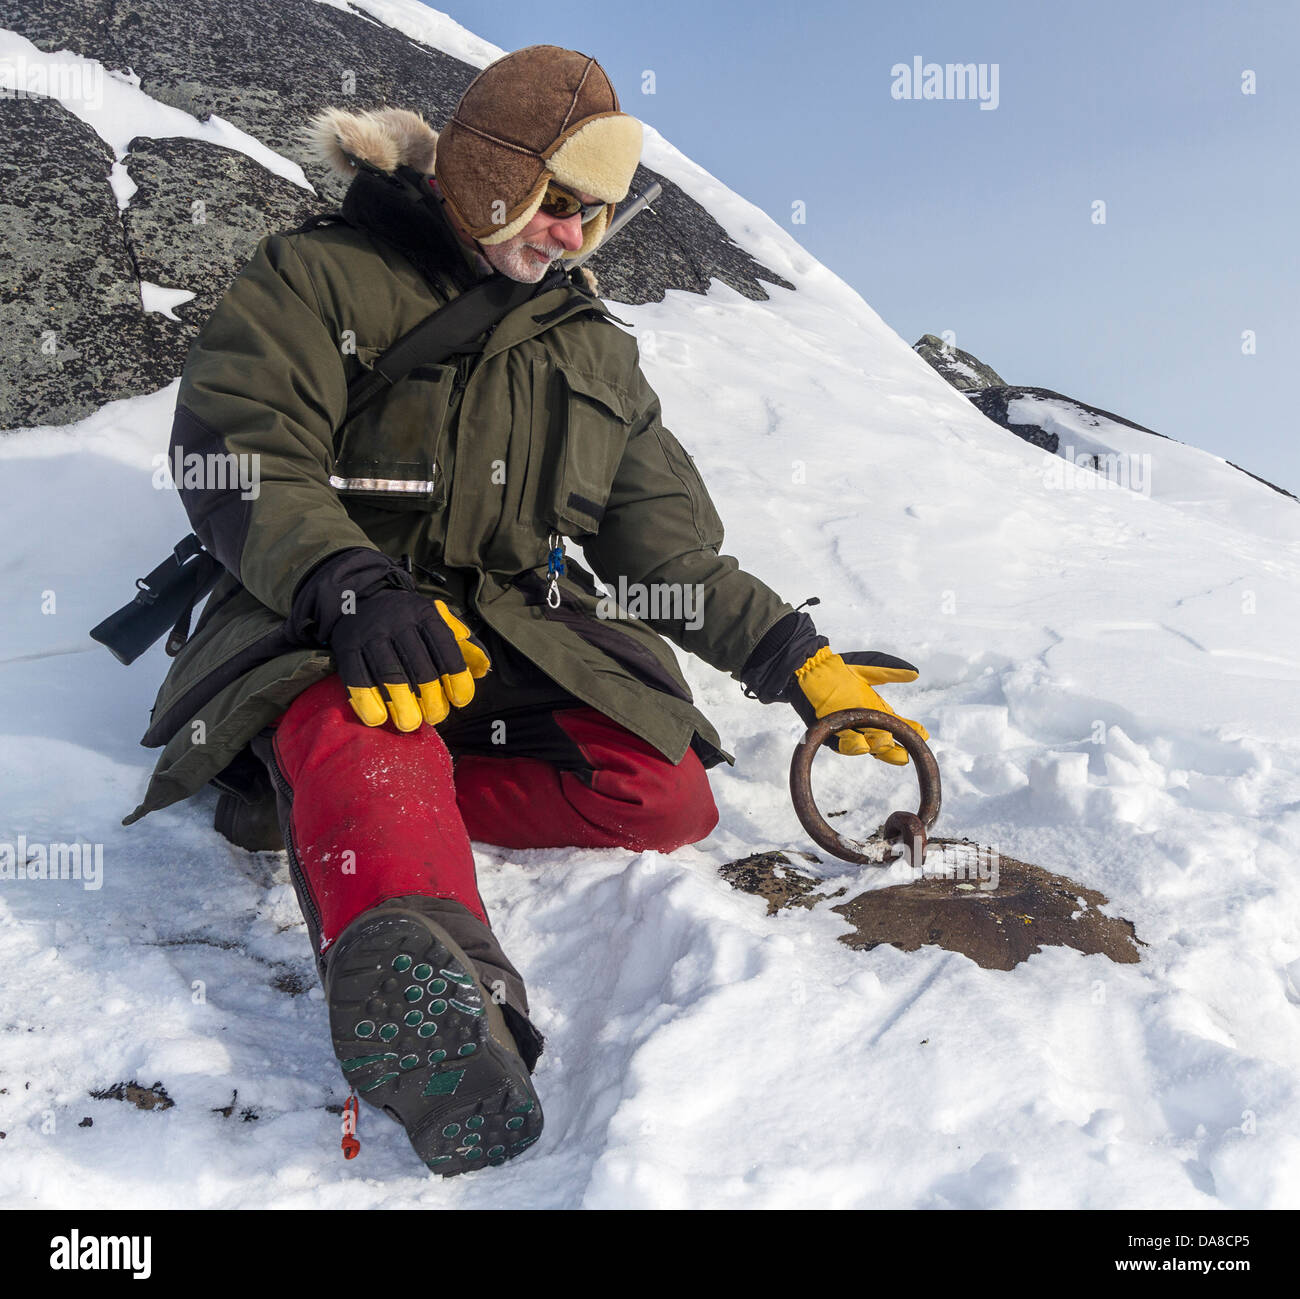 https://c8.alamy.com/comp/DA8CP5/man-dressed-in-arctic-clothing-inspects-the-imbedded-metal-ring-used-DA8CP5.jpg